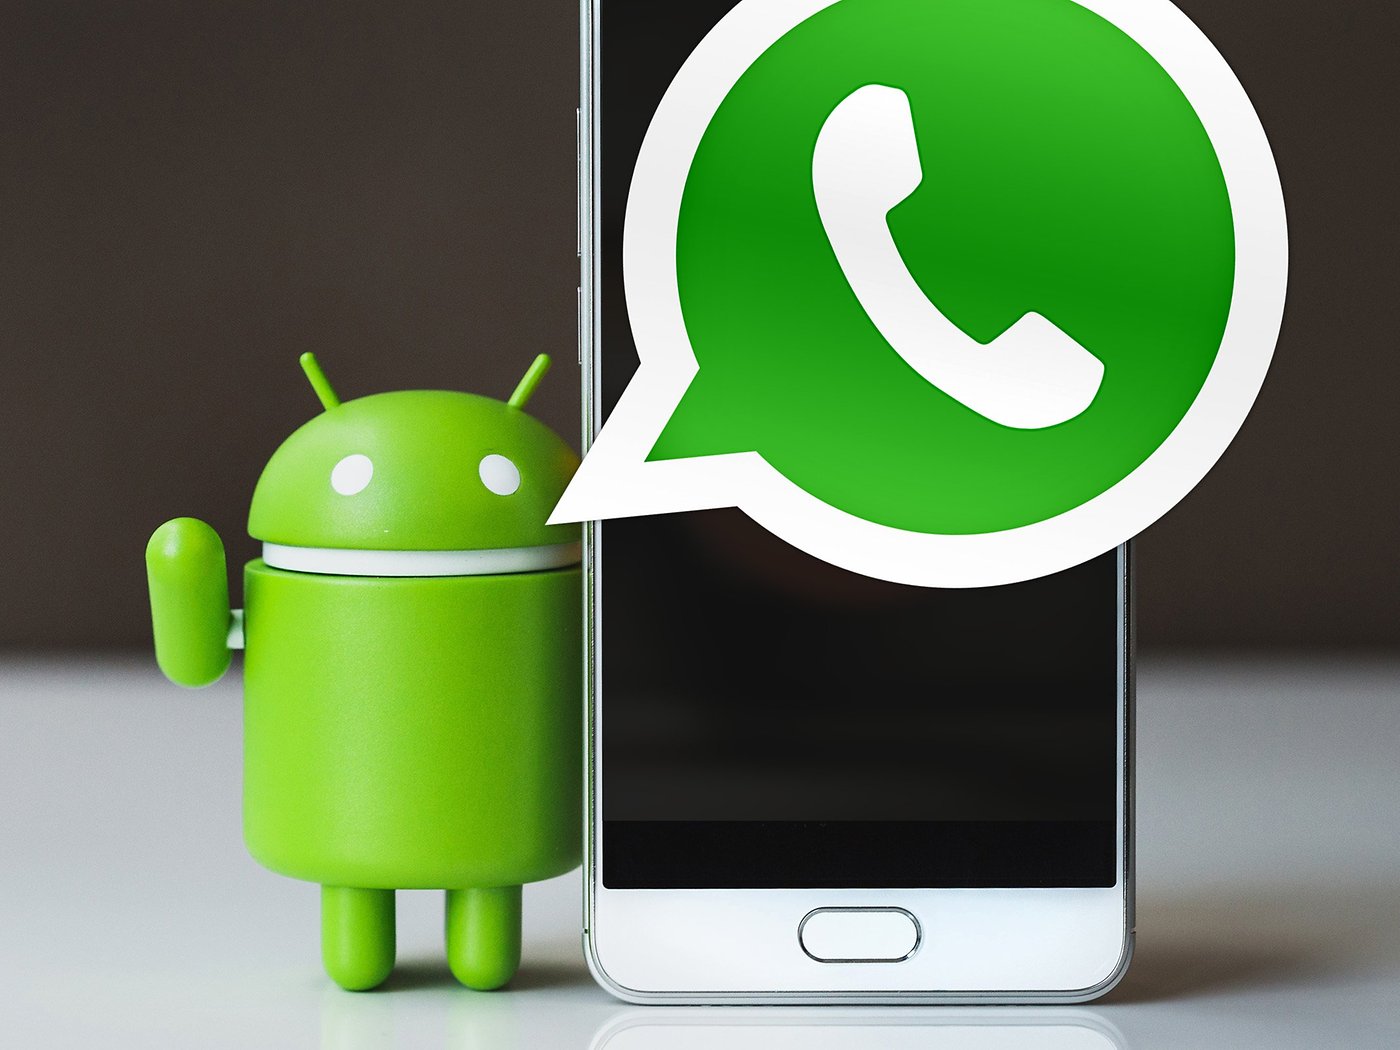 How to Convert Video into GIF in WhatsApp [2023]